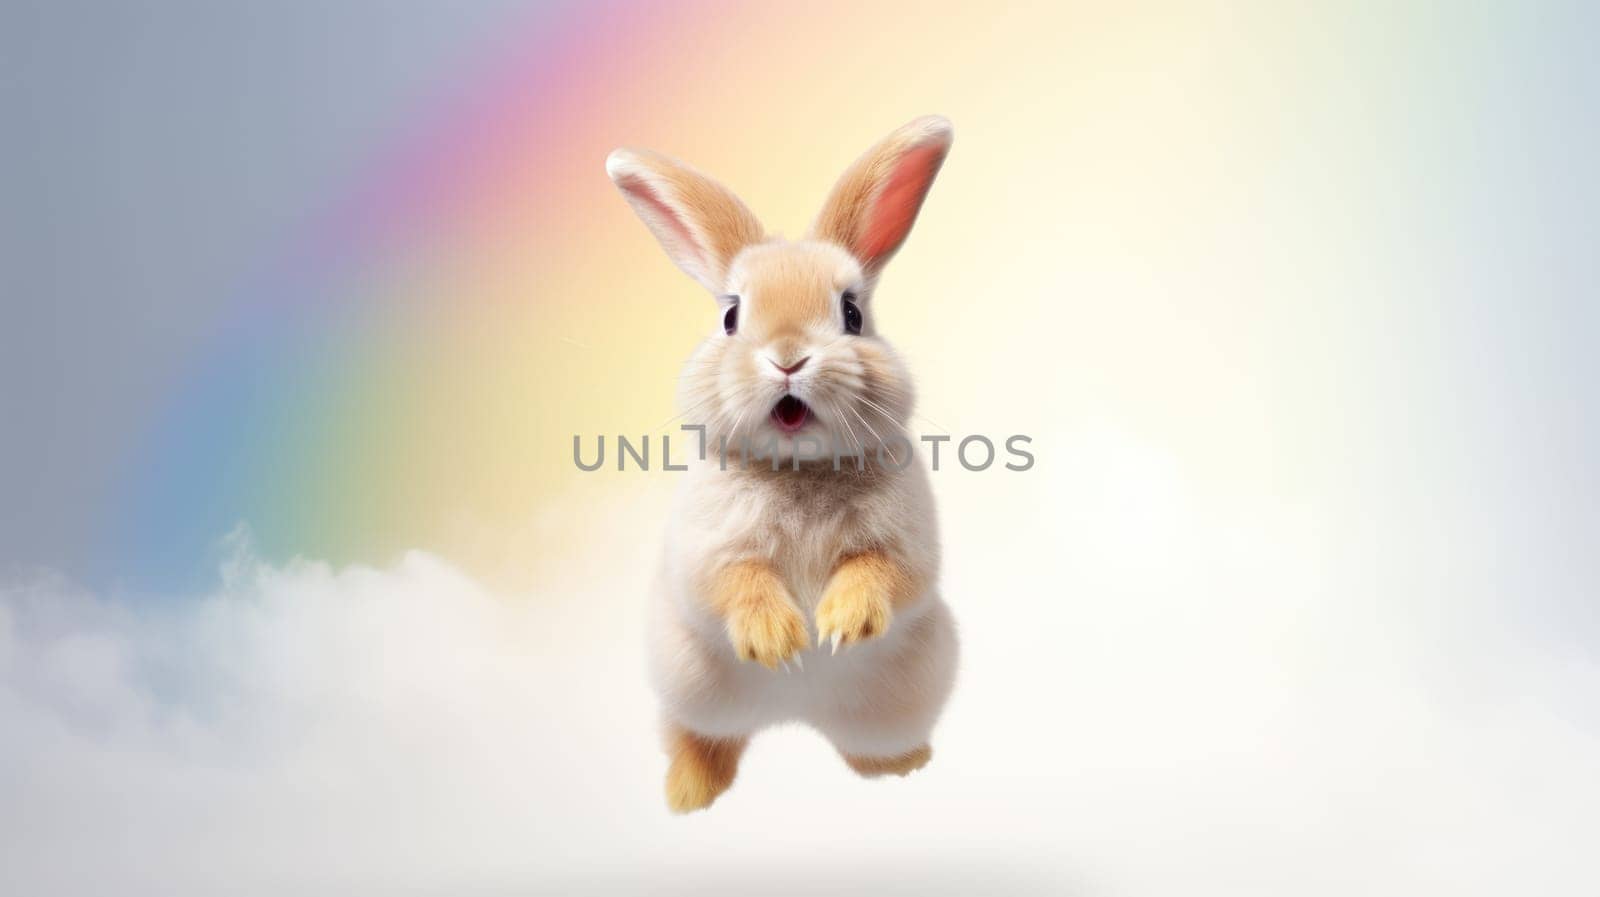 A fluffy white bunny joyfully leaps on white clouds under the bright sun, capturing natures beauty and the bunnys innocence, bringing joy and wonder.